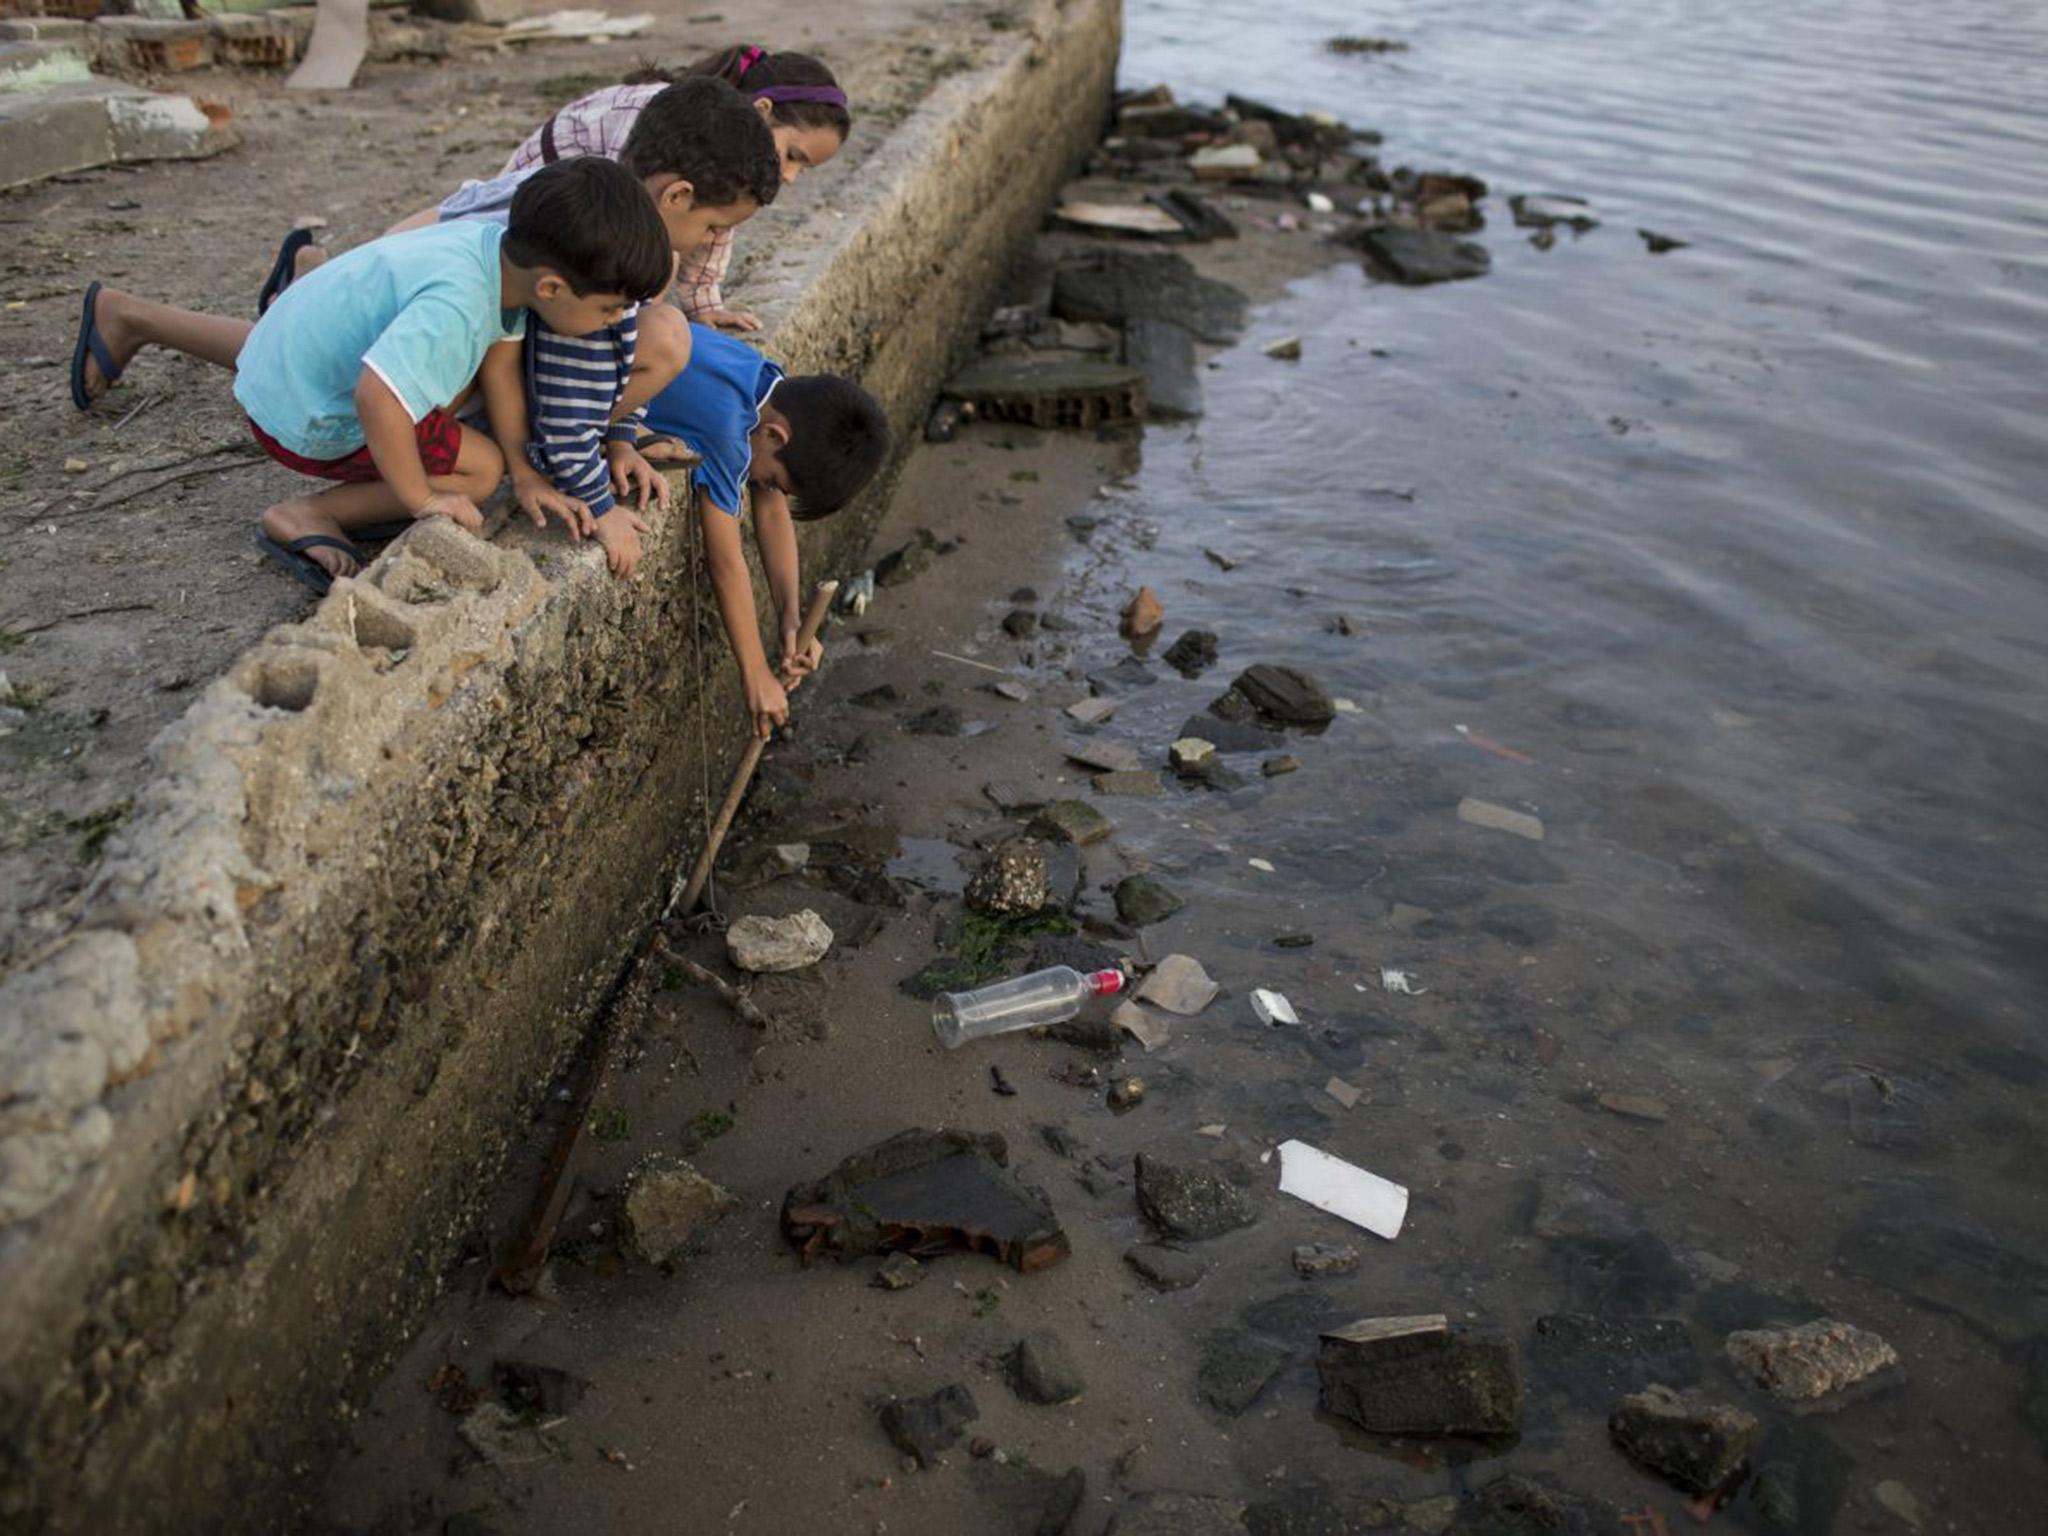 Children try to catch a crab as they play on the polluted shore of Guanabara Bay